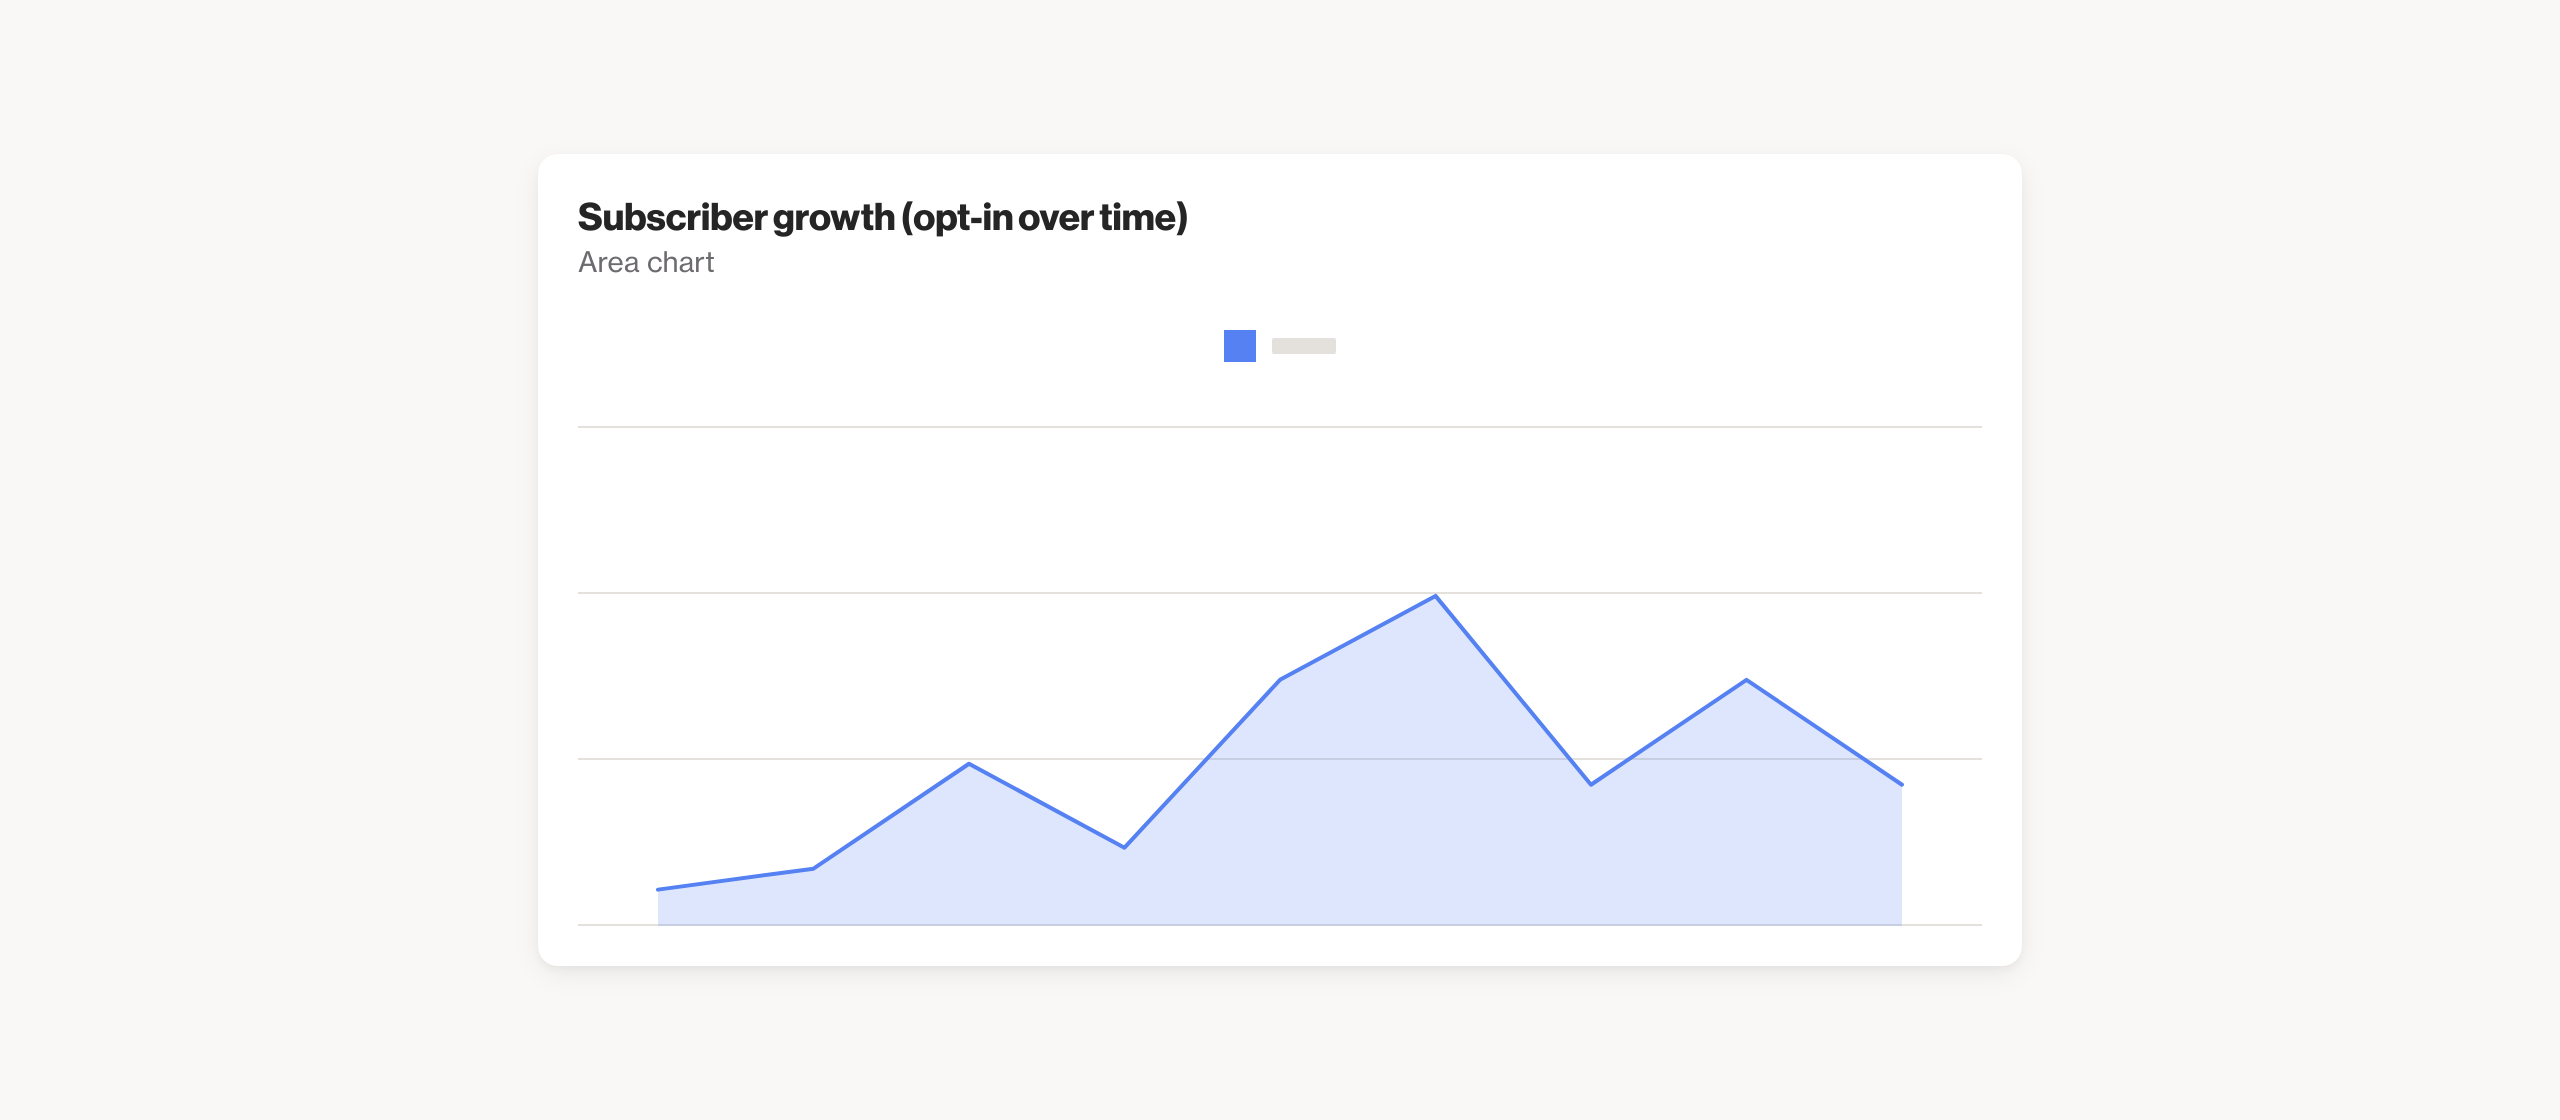 Subscriber growth (opt-in over time)